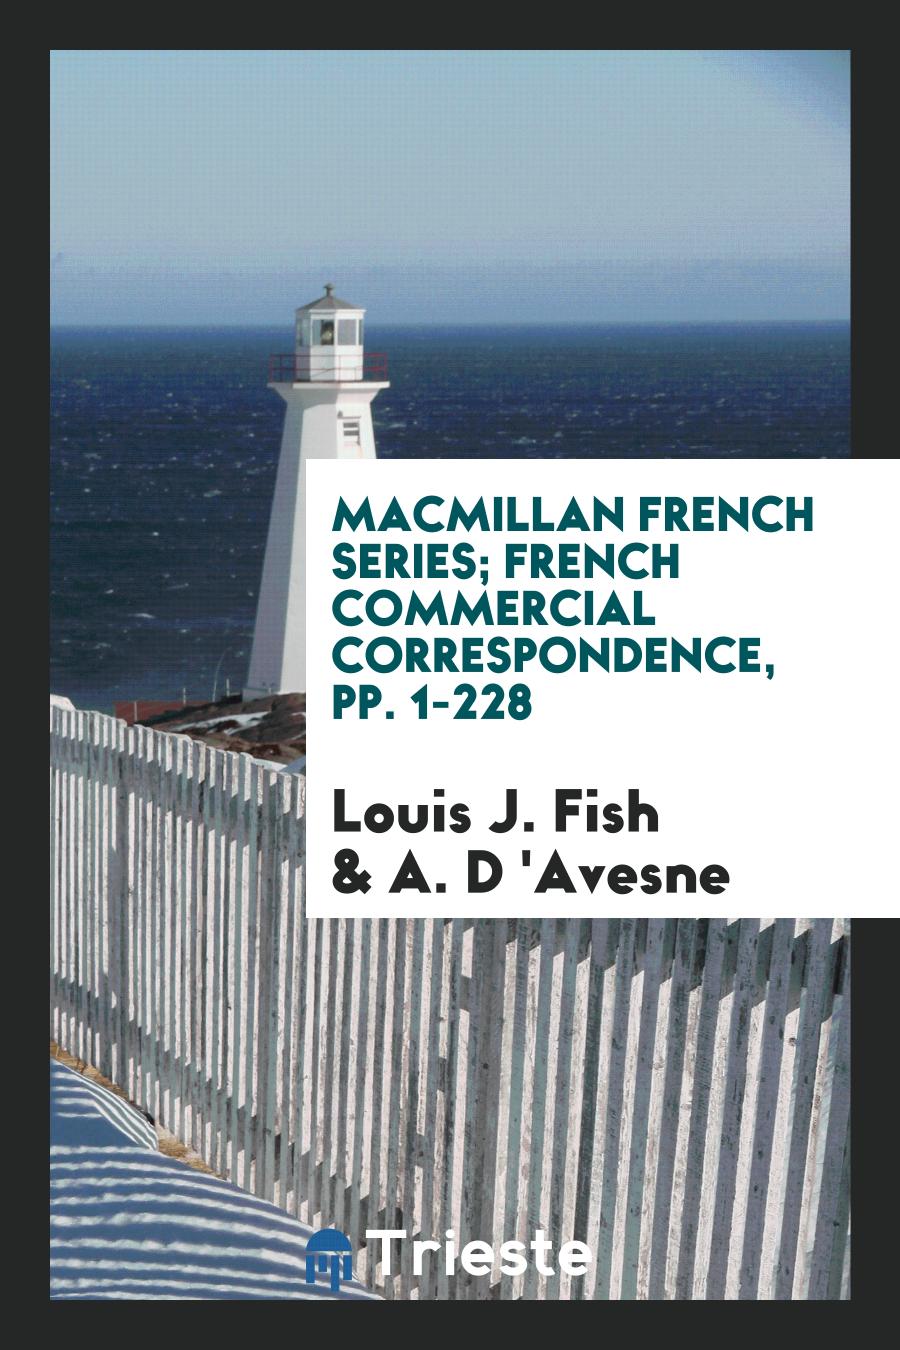 Macmillan French Series; French Commercial Correspondence, pp. 1-228